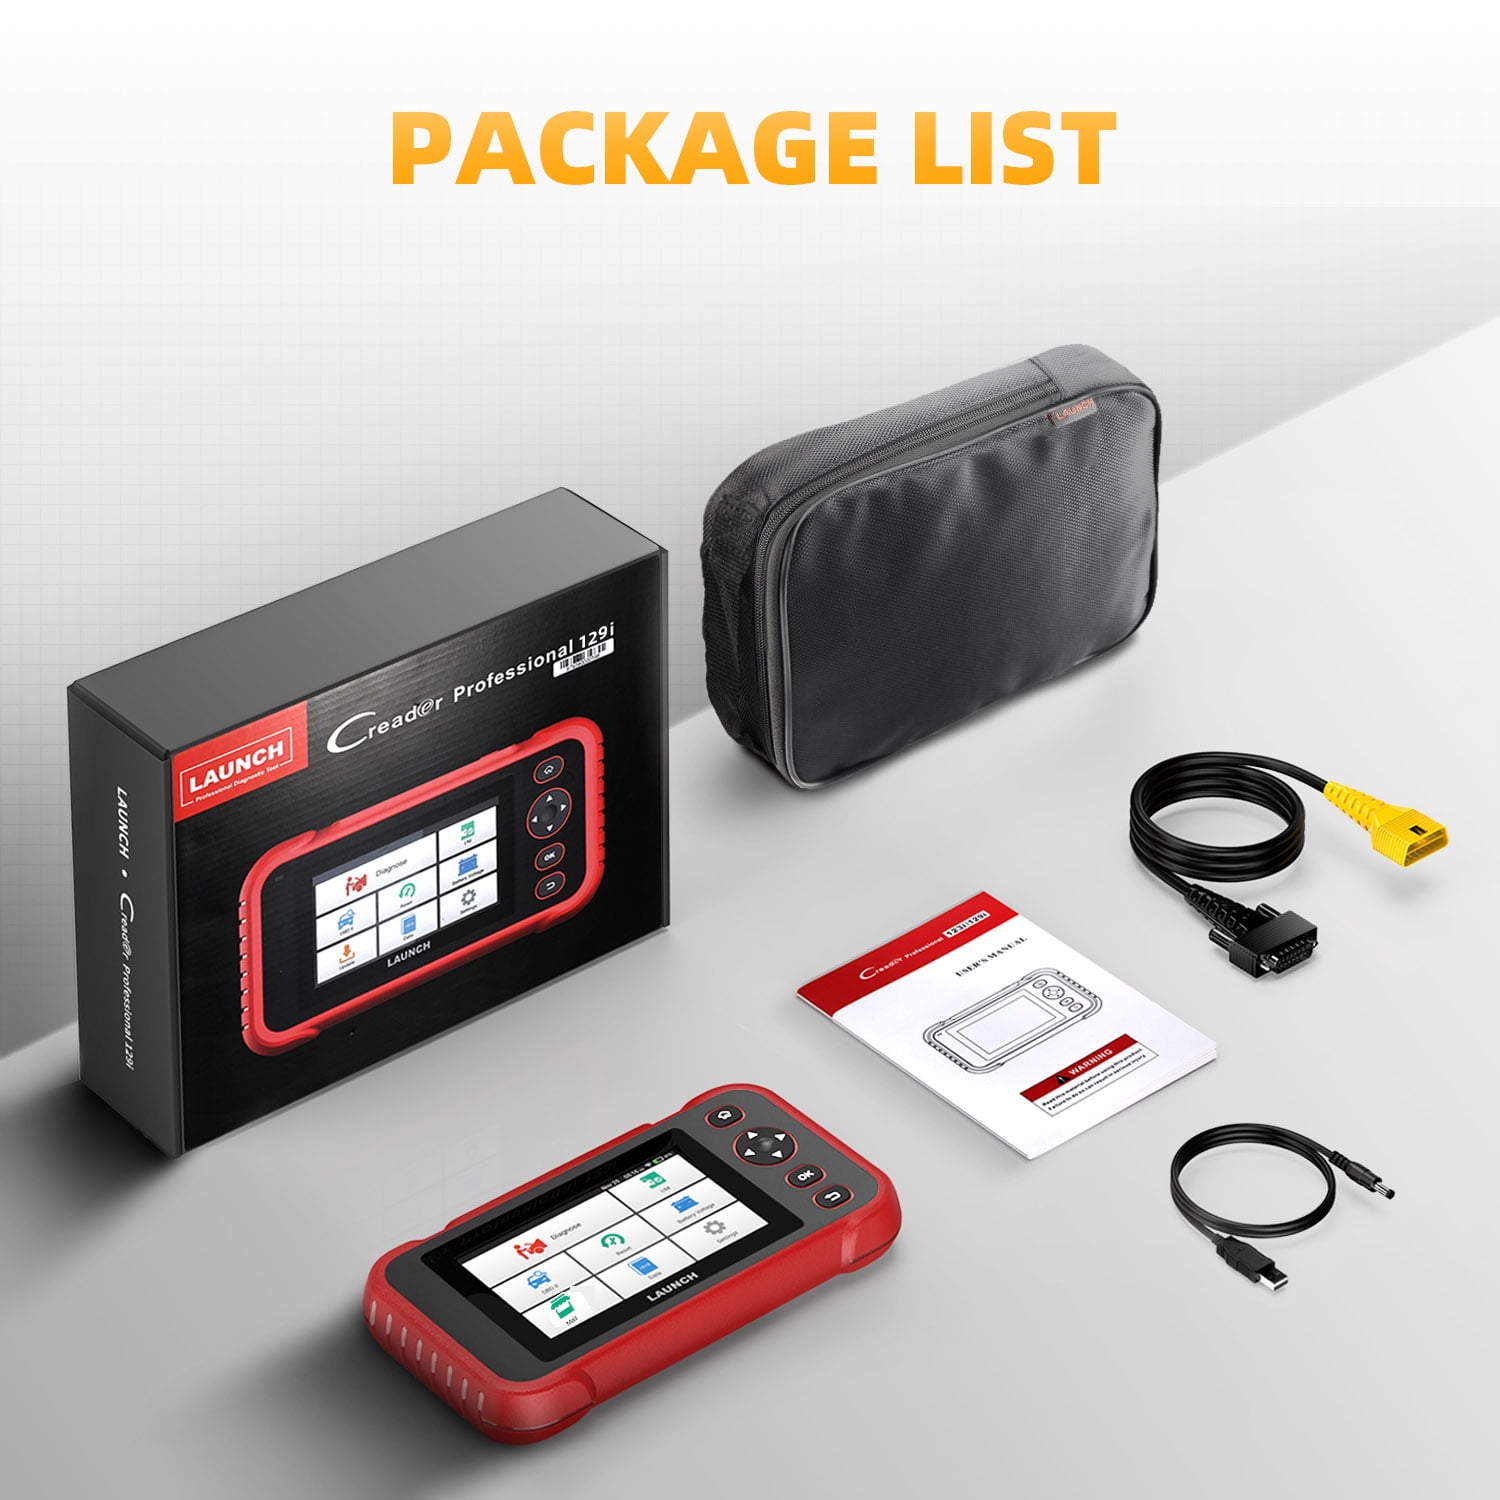 LAUNCH CRP129i OBD2 Scanner Car Scanner 4 Systems ABS SRS